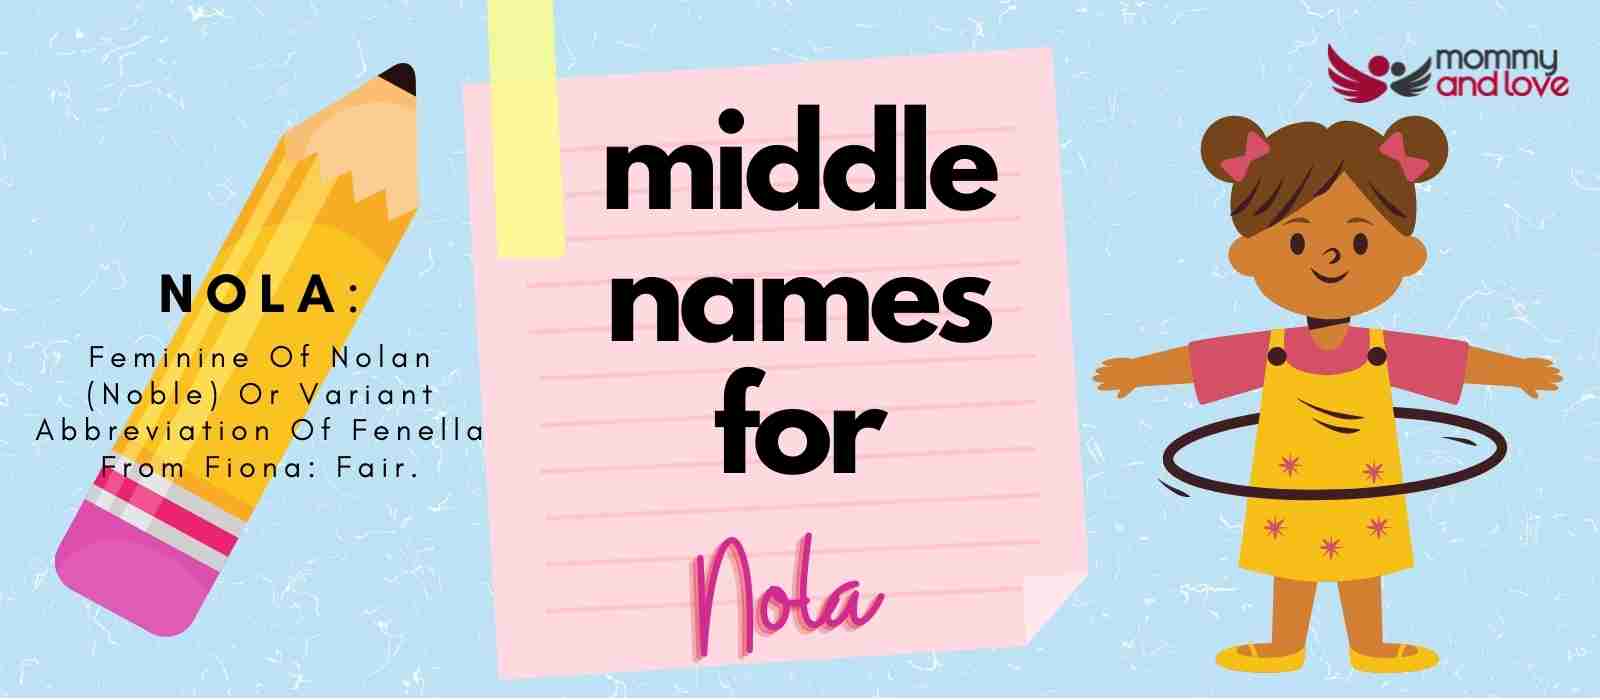 Middle Names for Nola